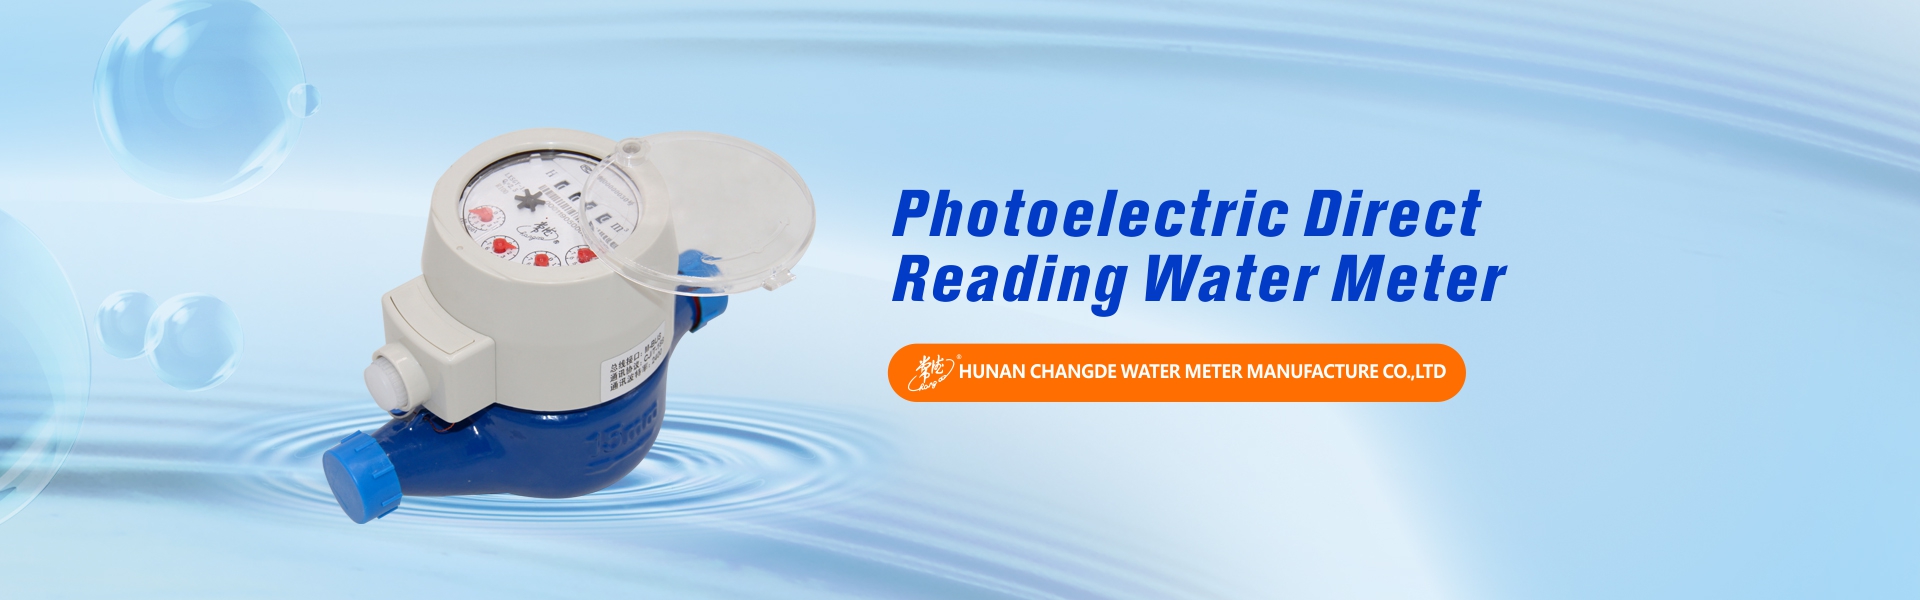 Changde Water Meter Manufacture Co.,Ltd